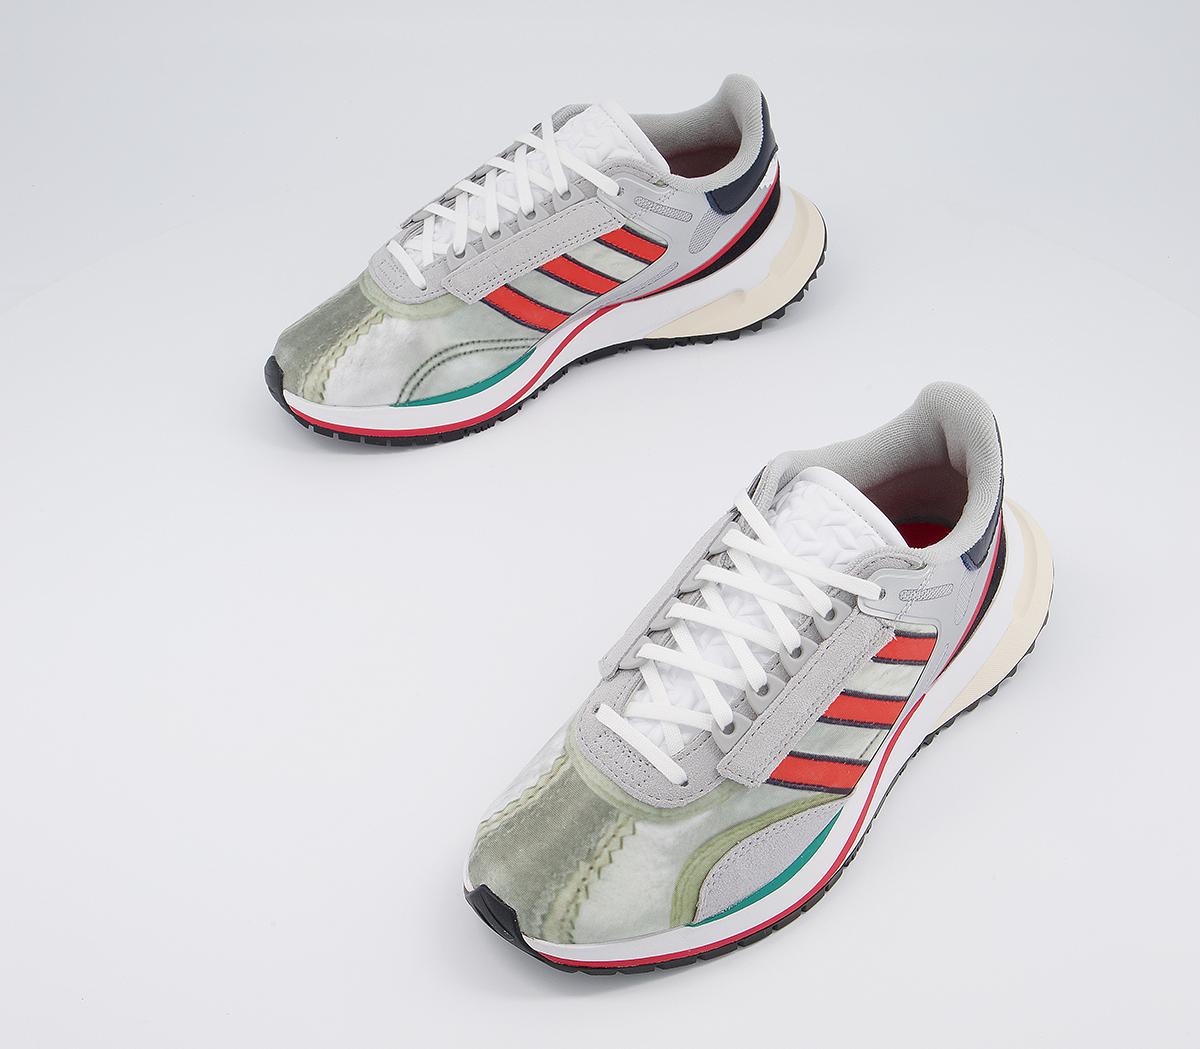 adidas Valerance Trainers Metallic Silver Red Legacy Ink - Unisex Sports